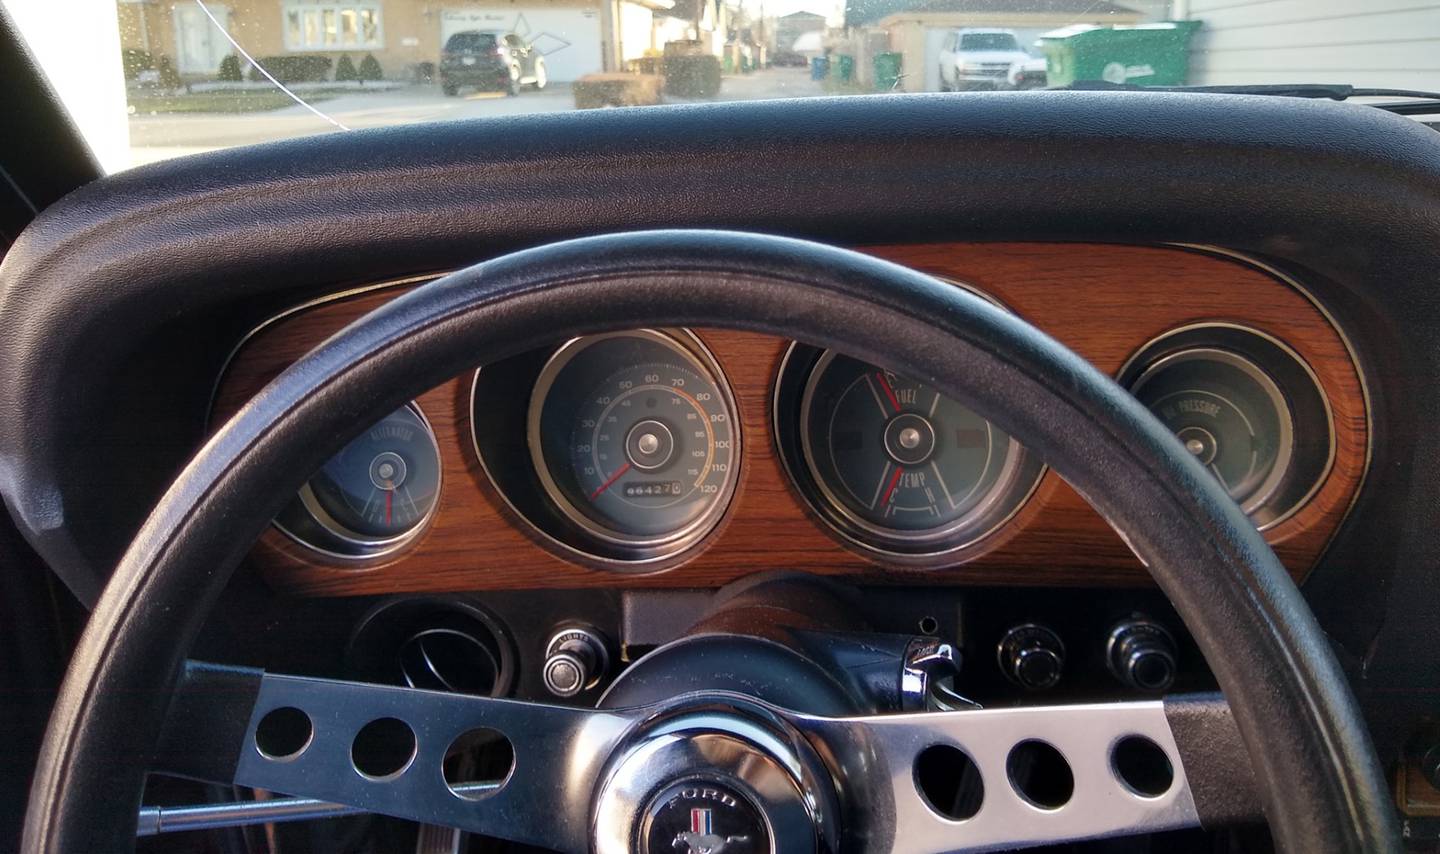 Photos by Rudy Host, Jr. - 1970 Ford Mustang Dash